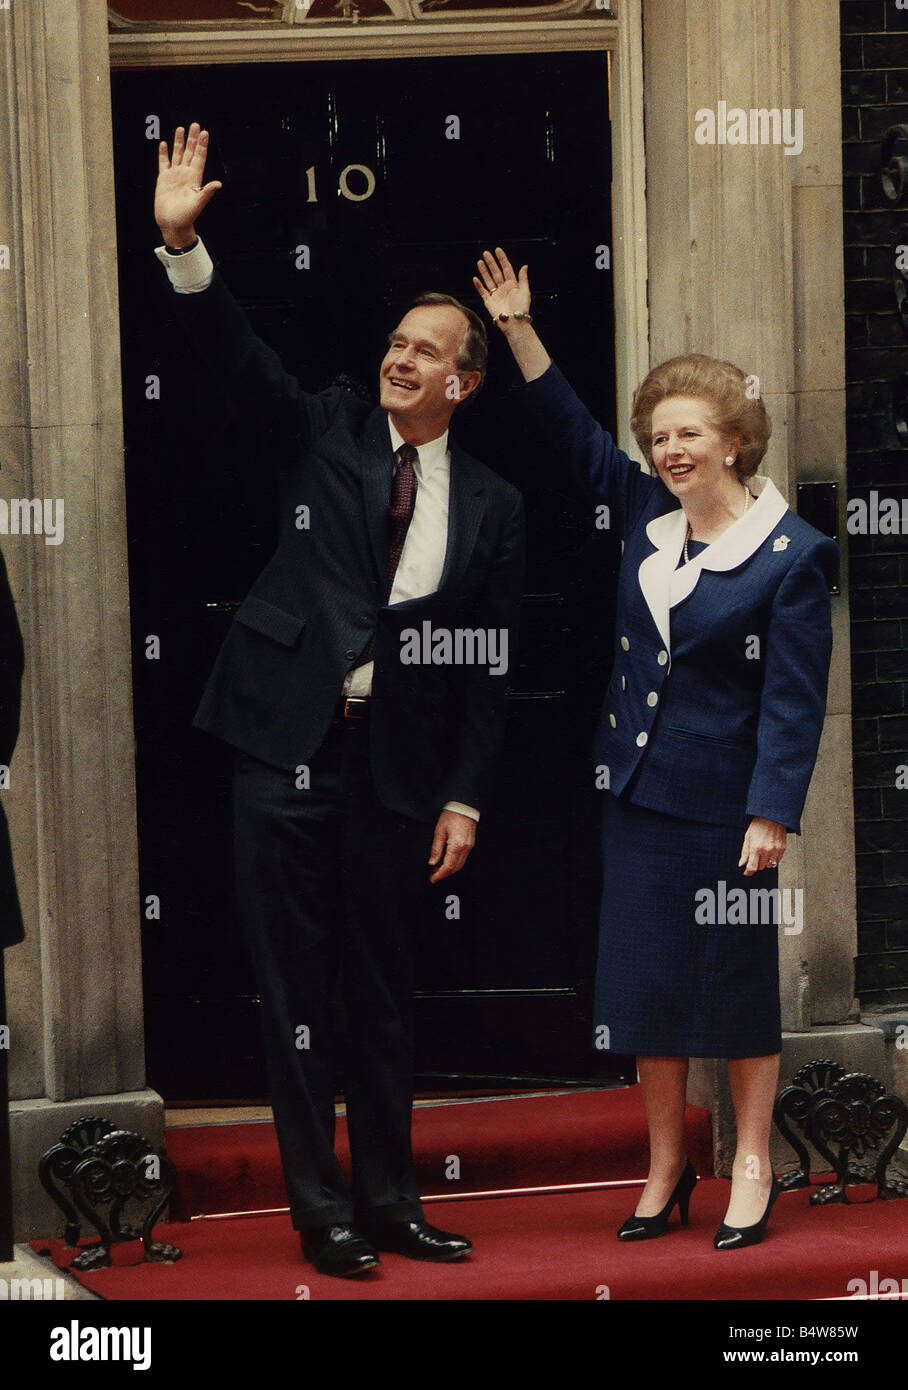 George Bush President of the United States with Prime Minister Margaret Thatcher on the steps of 10 Downing Street Stock Photo